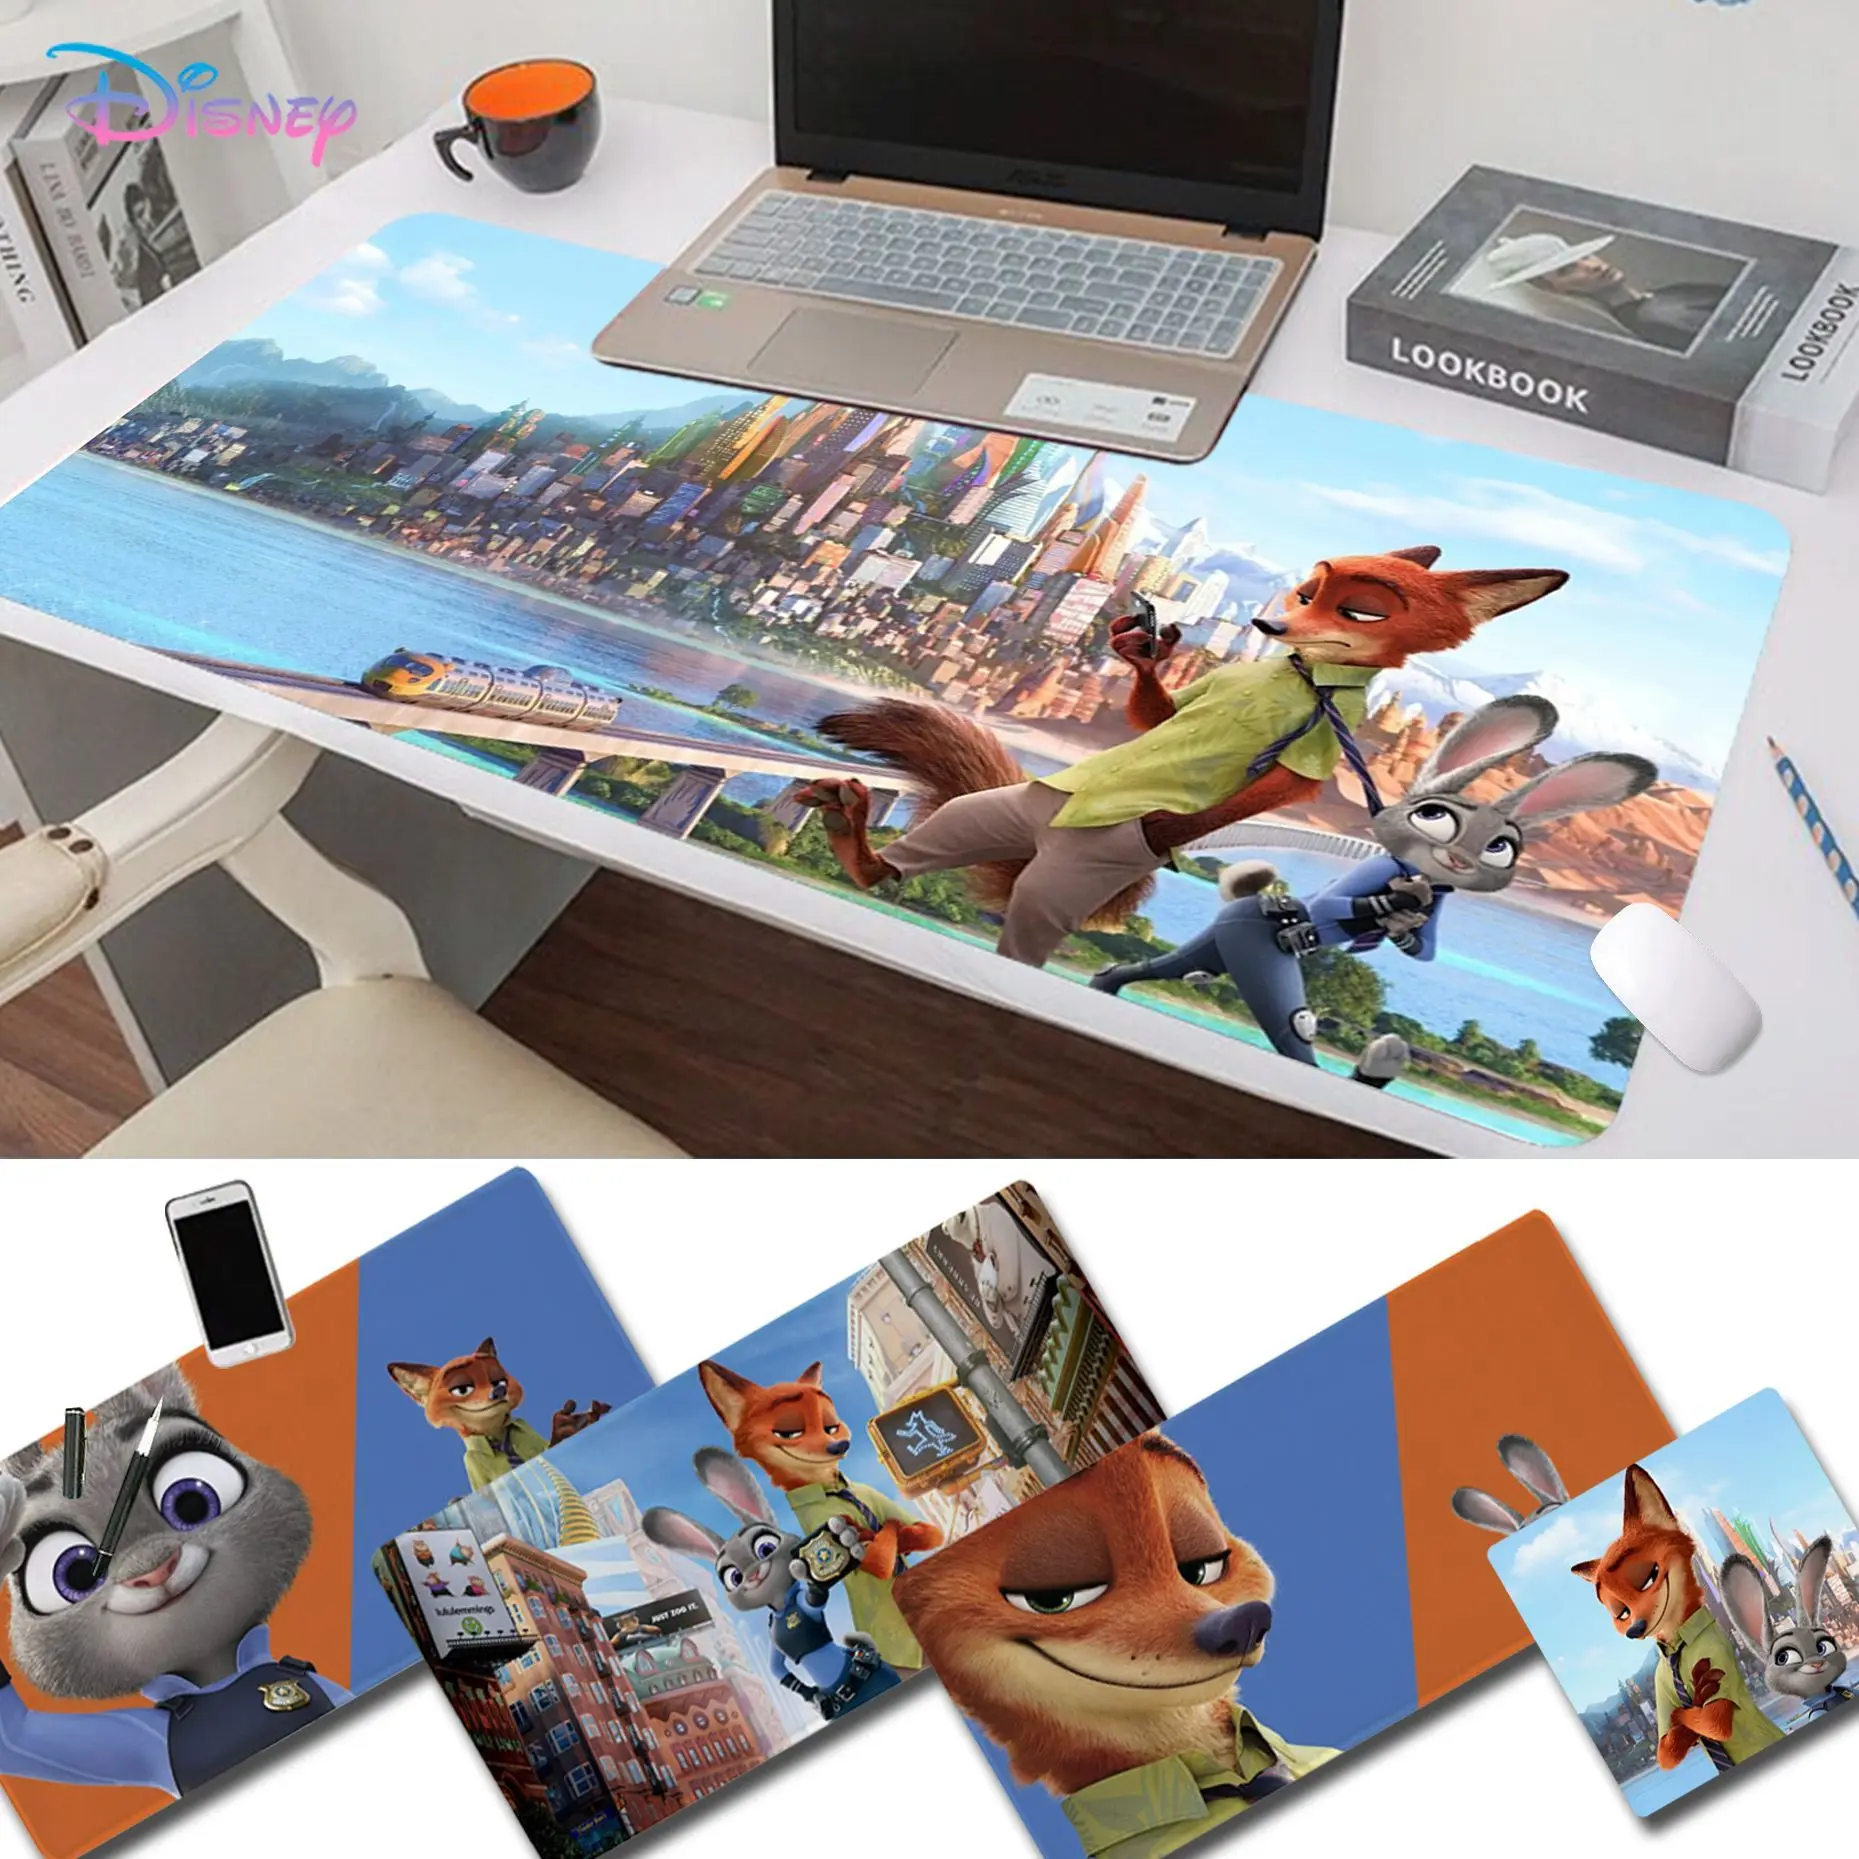 

Disney Movie Zootopia Mousepad Beautiful Large Gaming Mousepad L XL XXL Gamer Mouse Pad Size For Game Keyboard Pad For Gamer